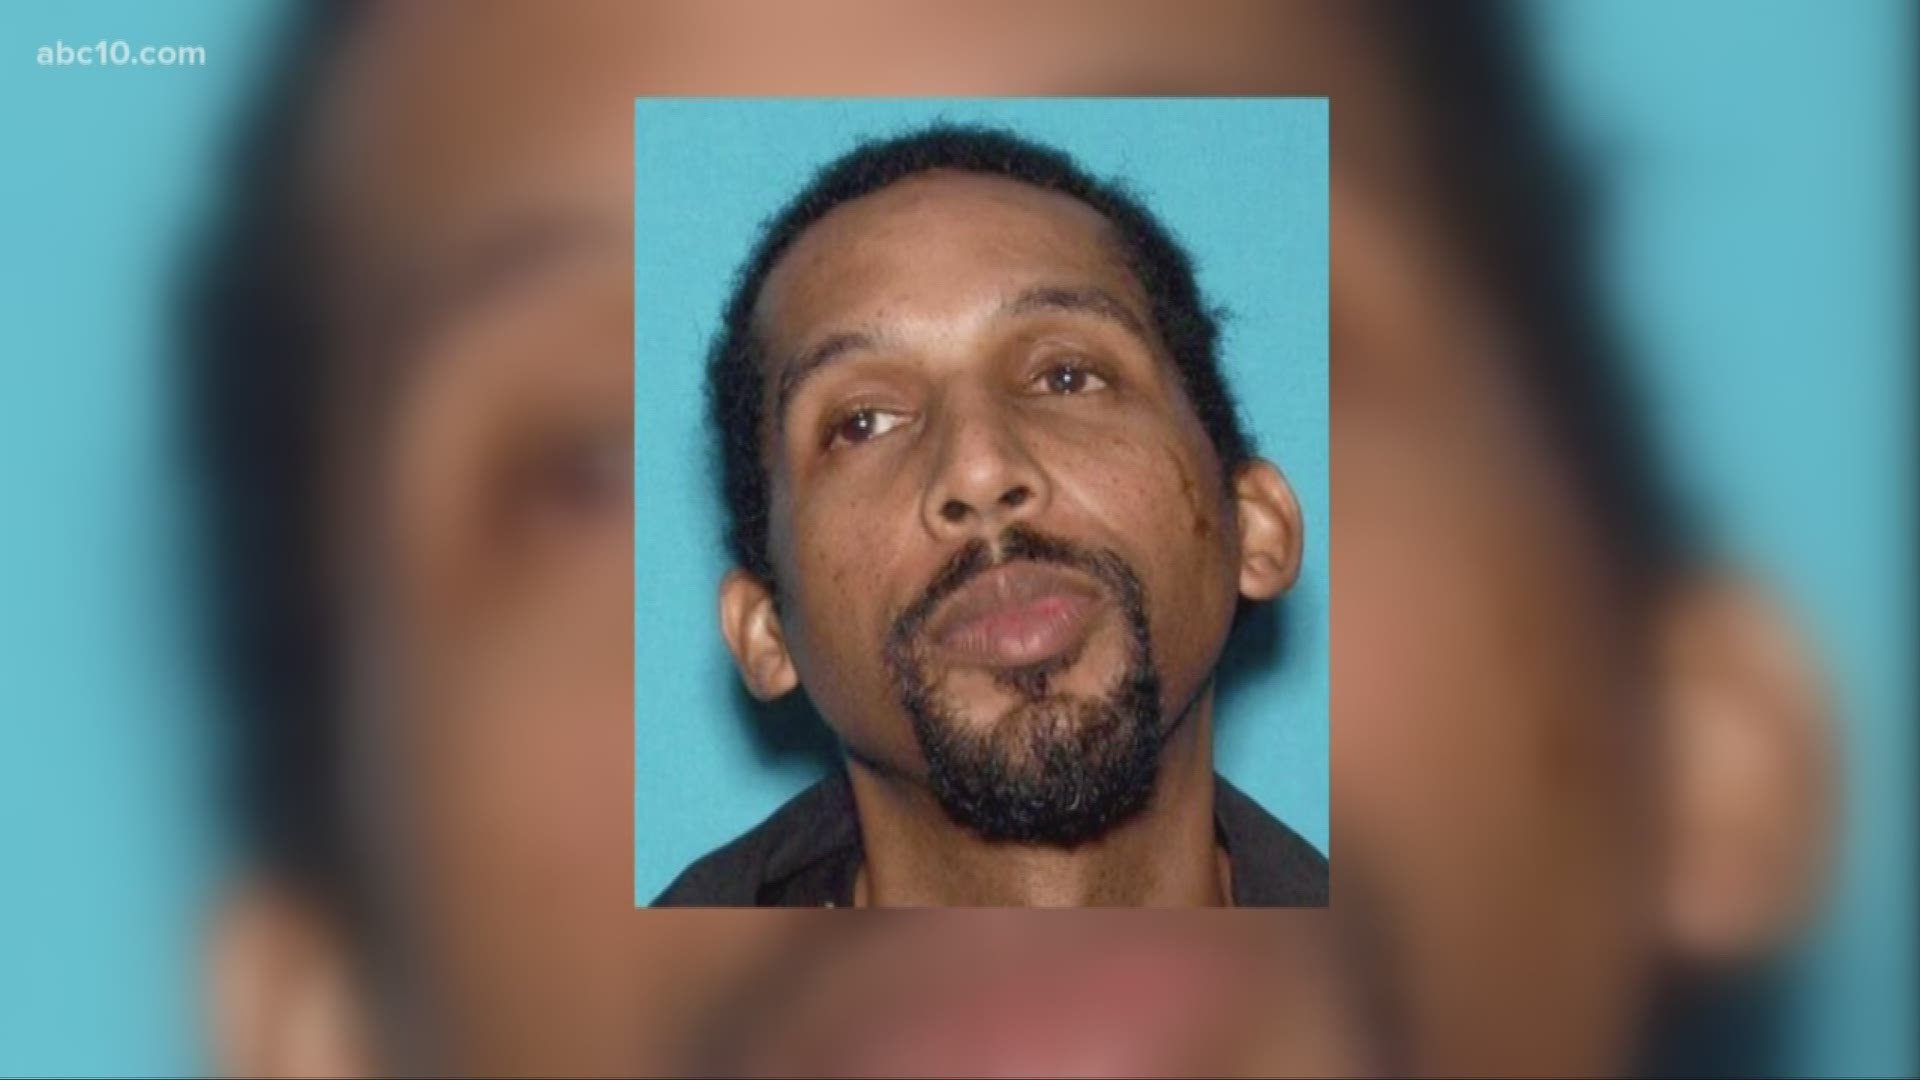 Vacaville Police are investigating a stabbing and fire Monday night that left three people injured, including a child. The suspect has been identified as 37-year-old Nathaniel Holland.